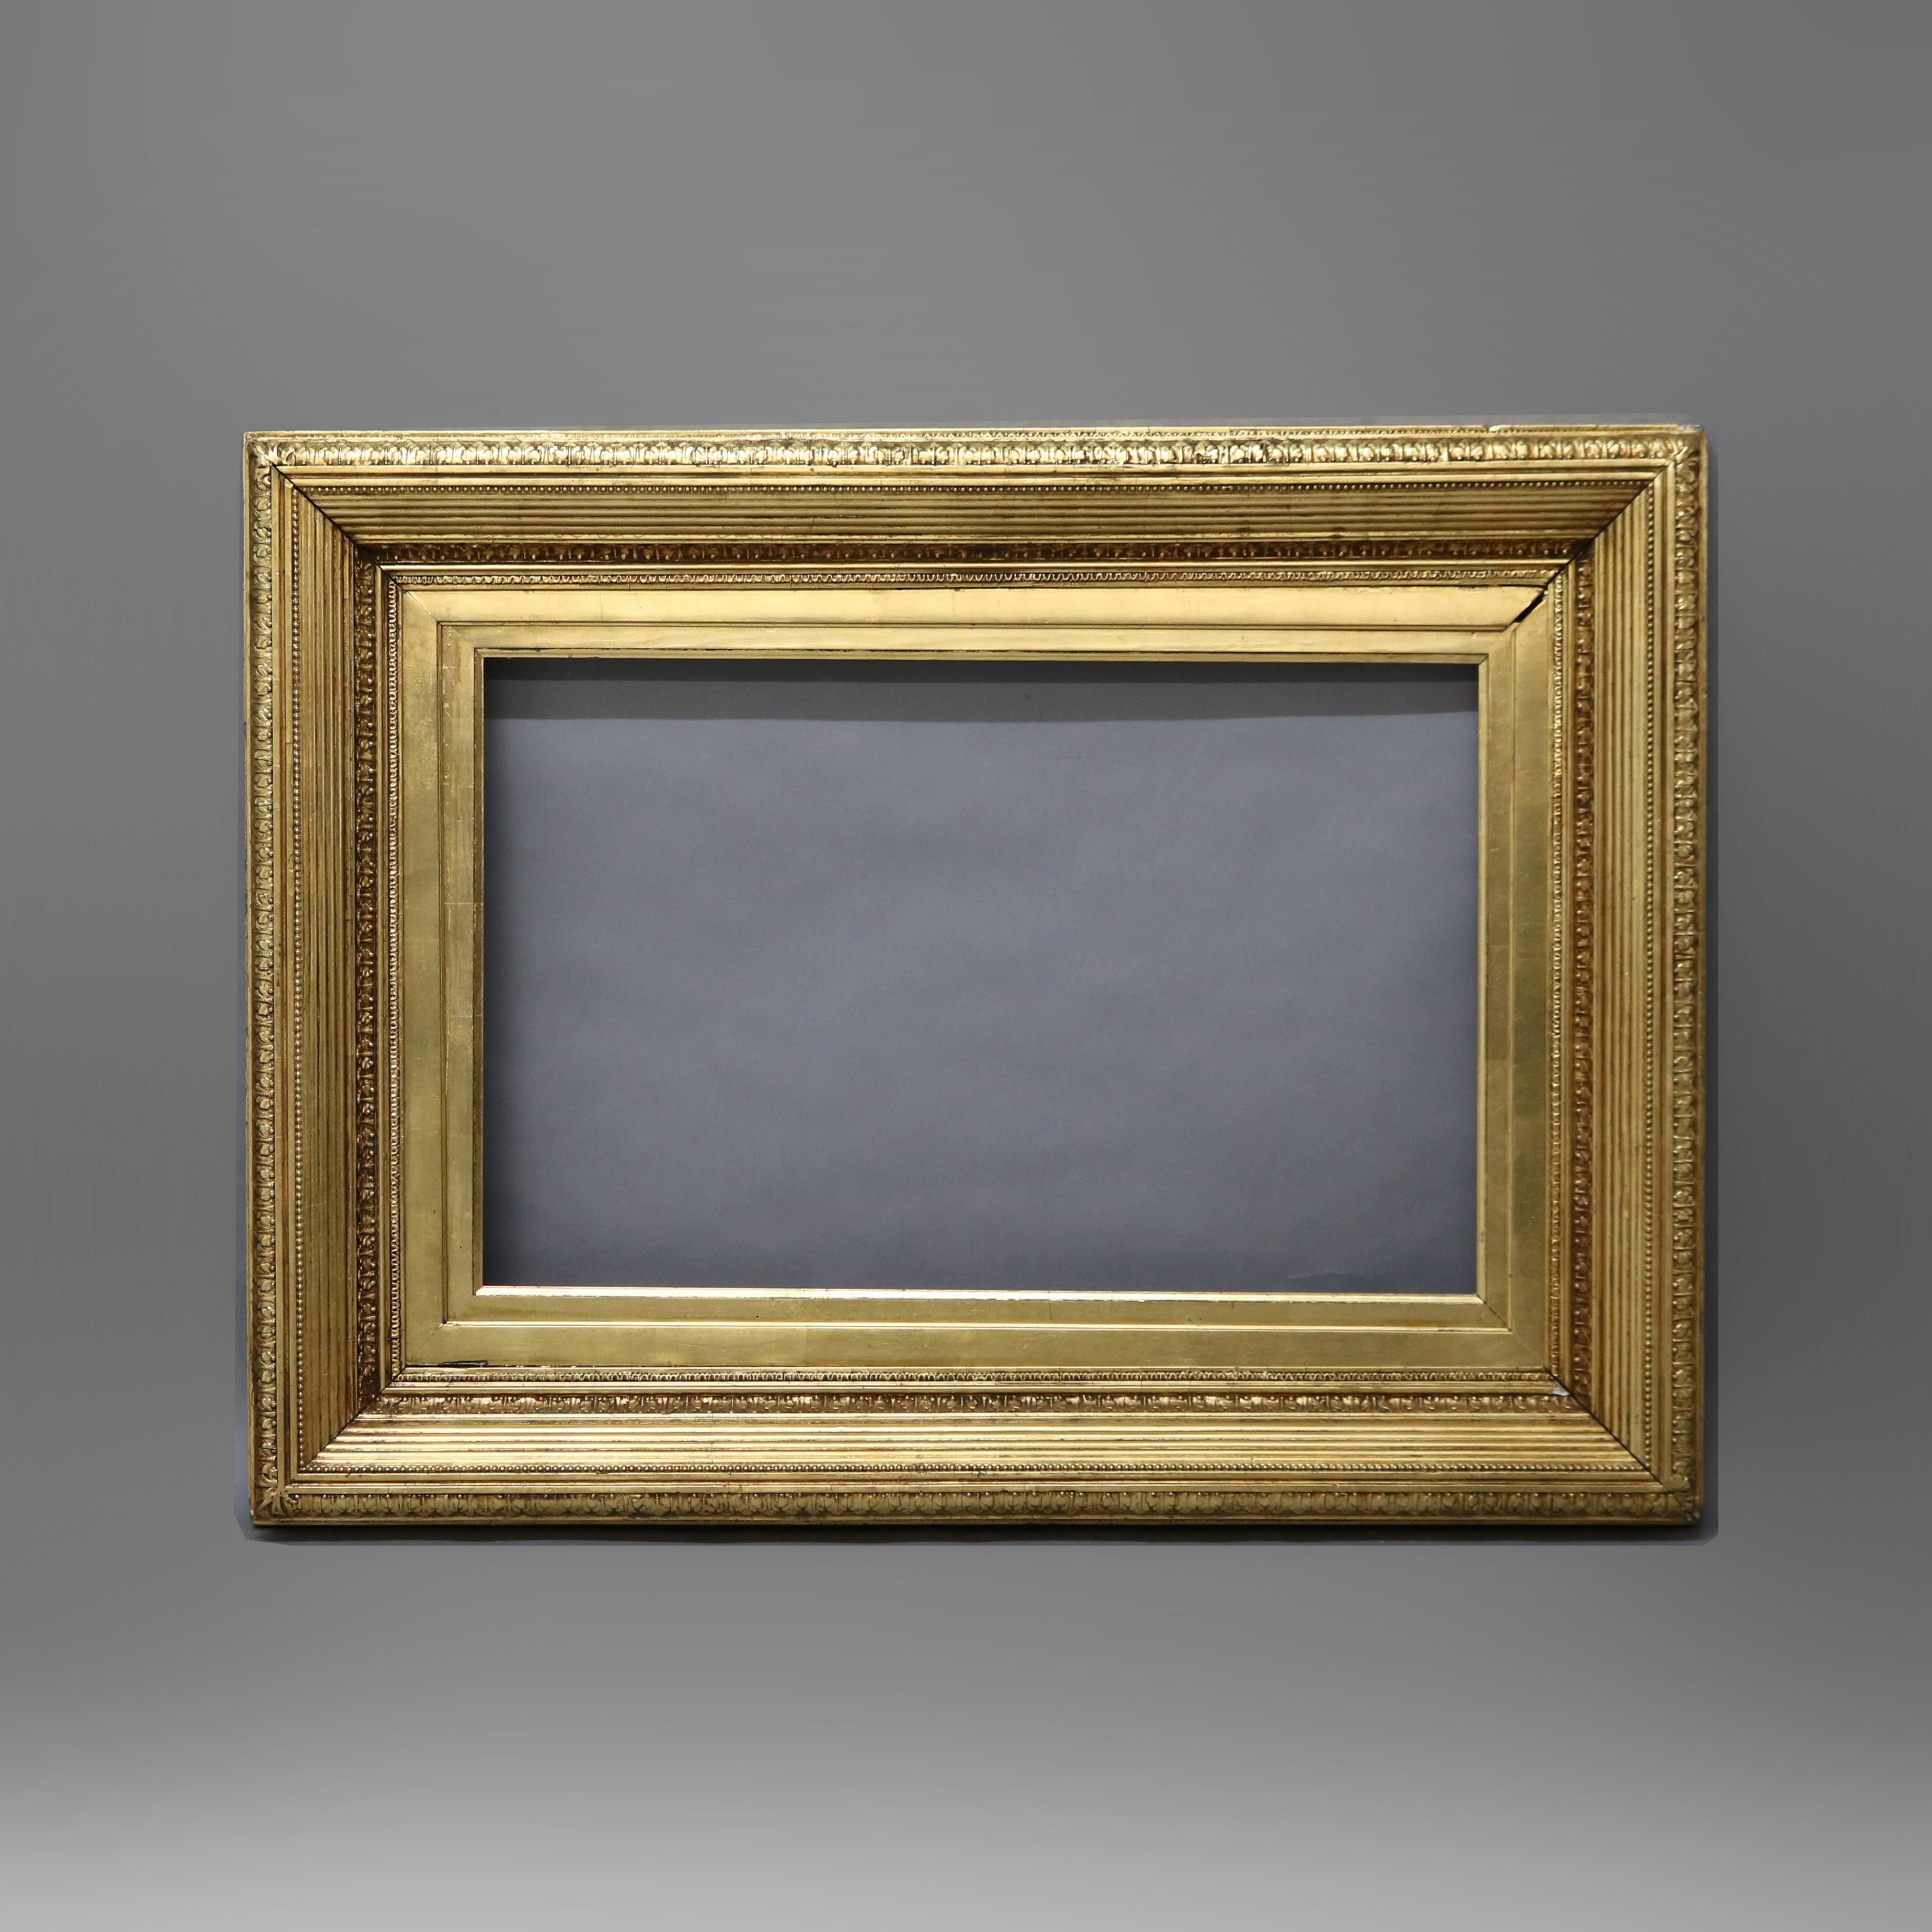 An antique and large museum artwork or painting frame offers giltwood construction with reeded, bead, and foliate elements, c1890

Measures- Overall 36.75''h x 48.75''w x 5''d; Sight 21.25